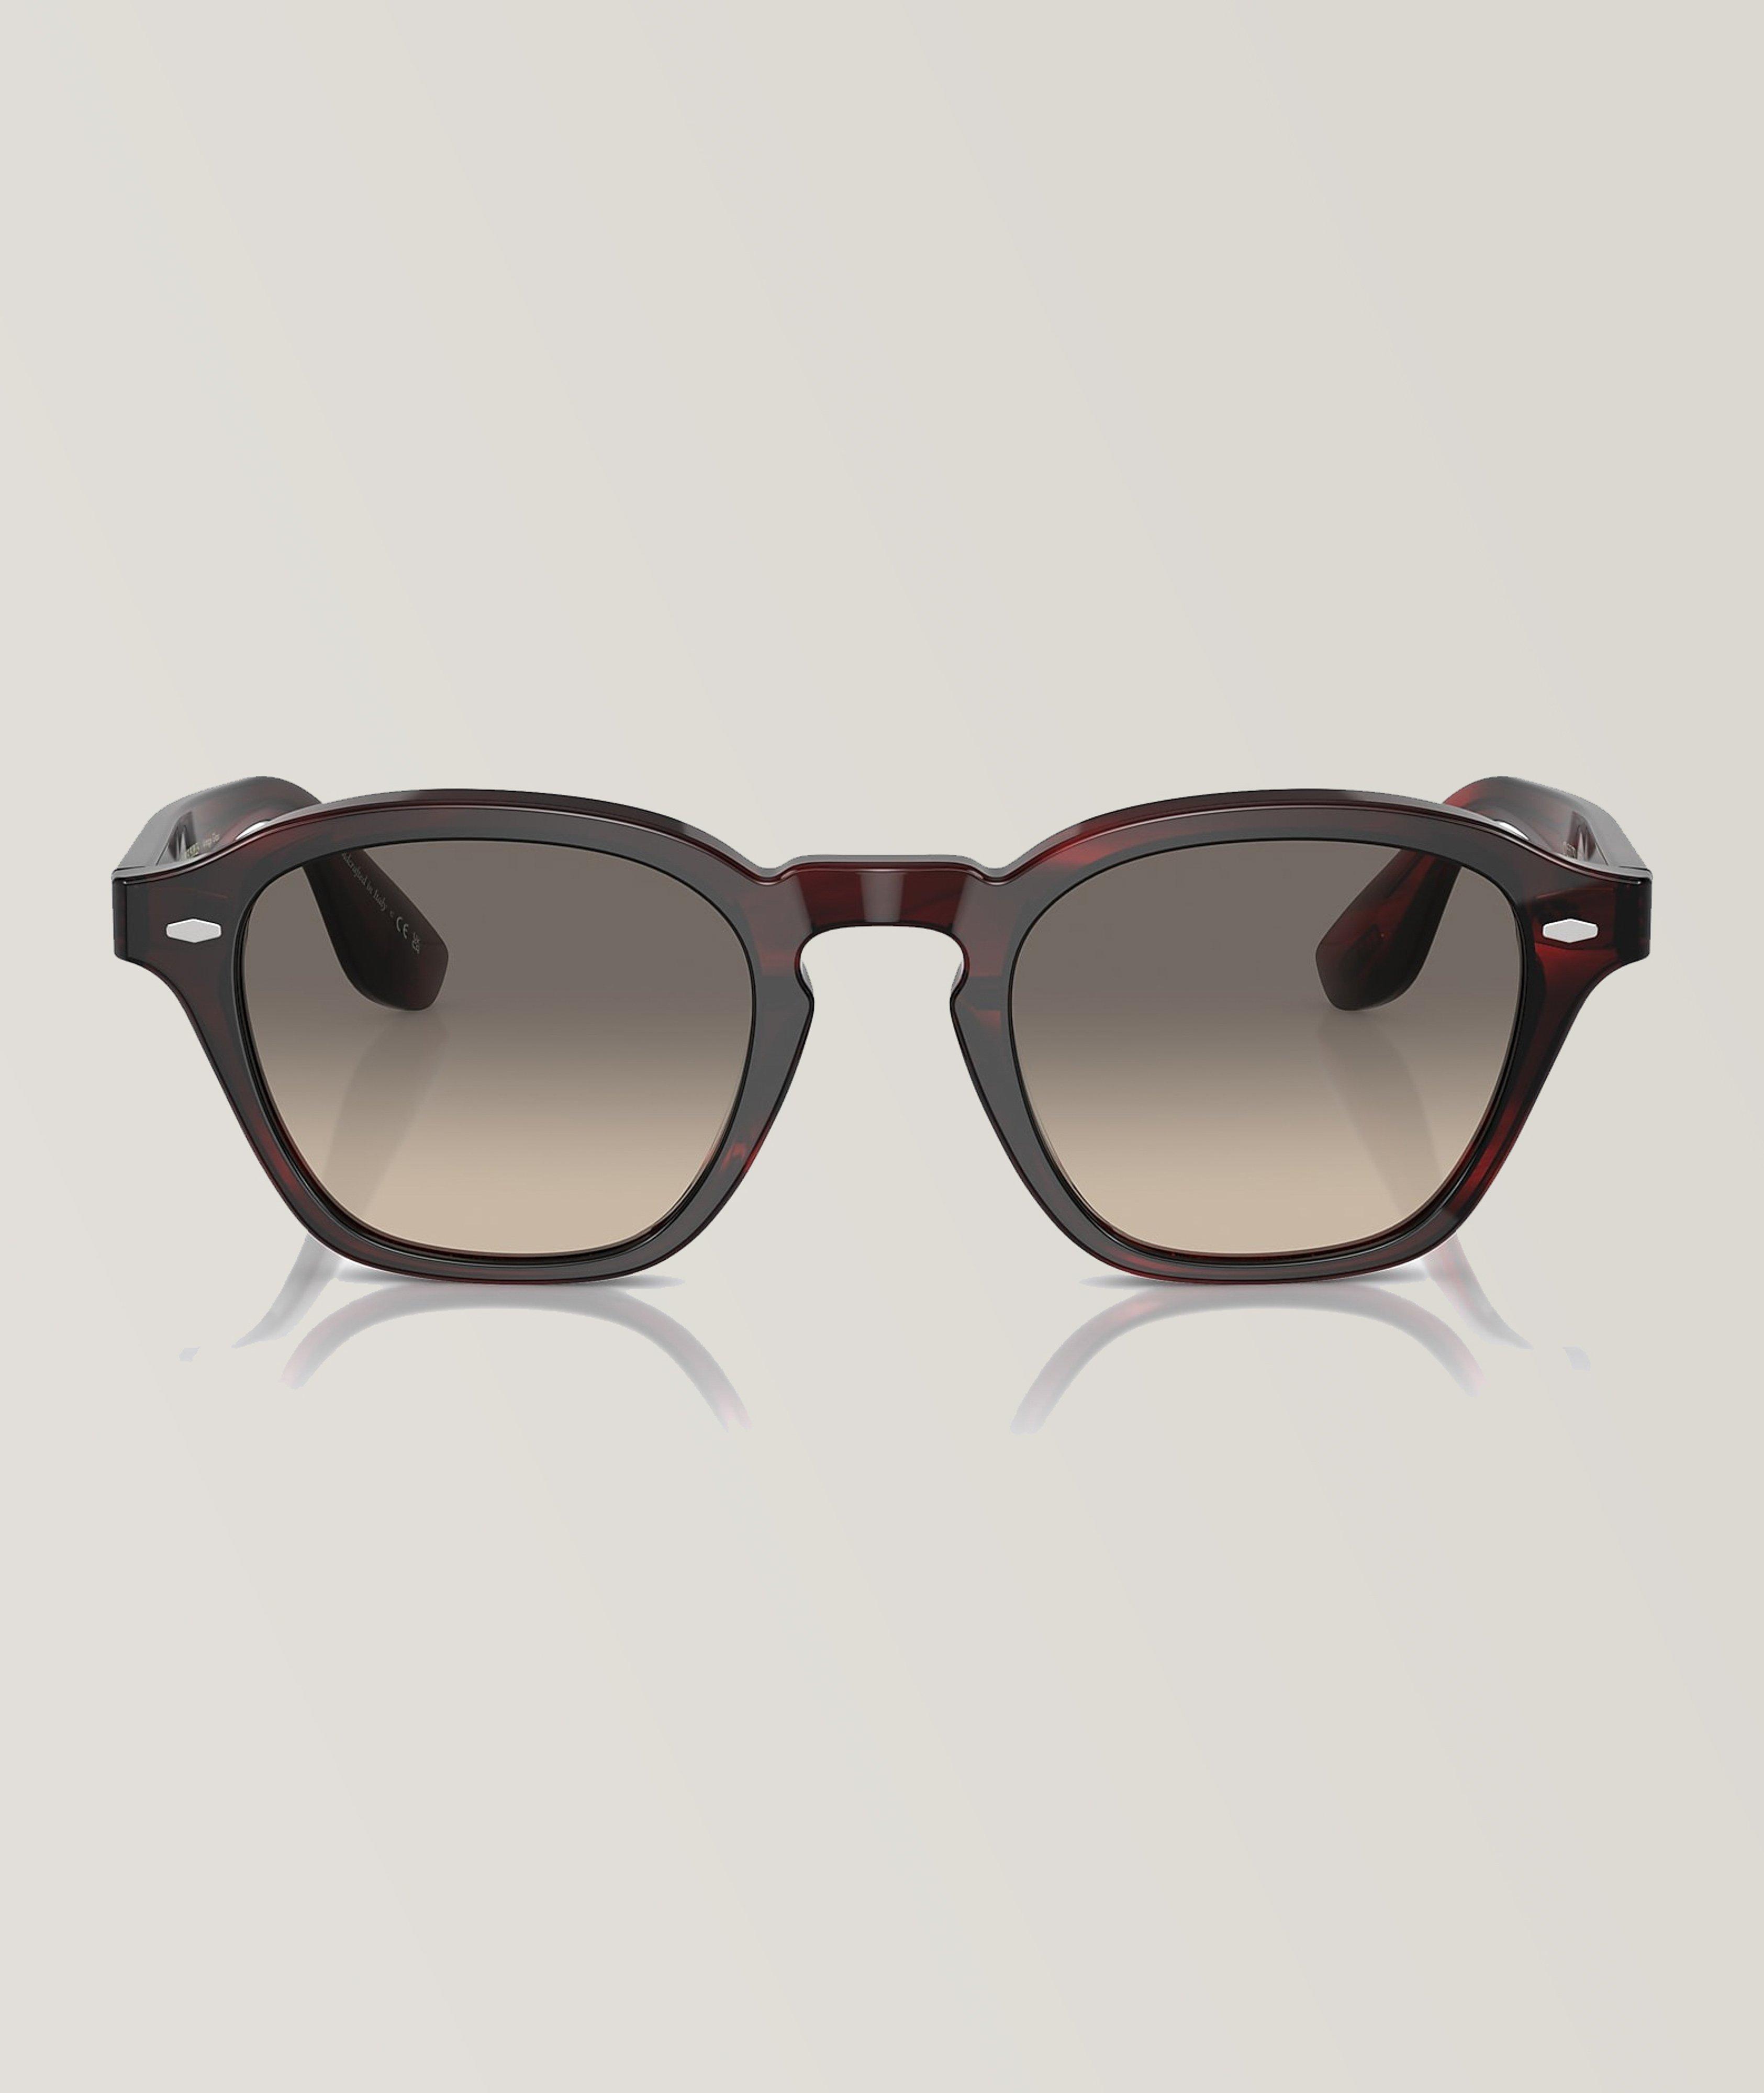 Lunettes de soleil Peppe, collection Oliver Peoples image 1